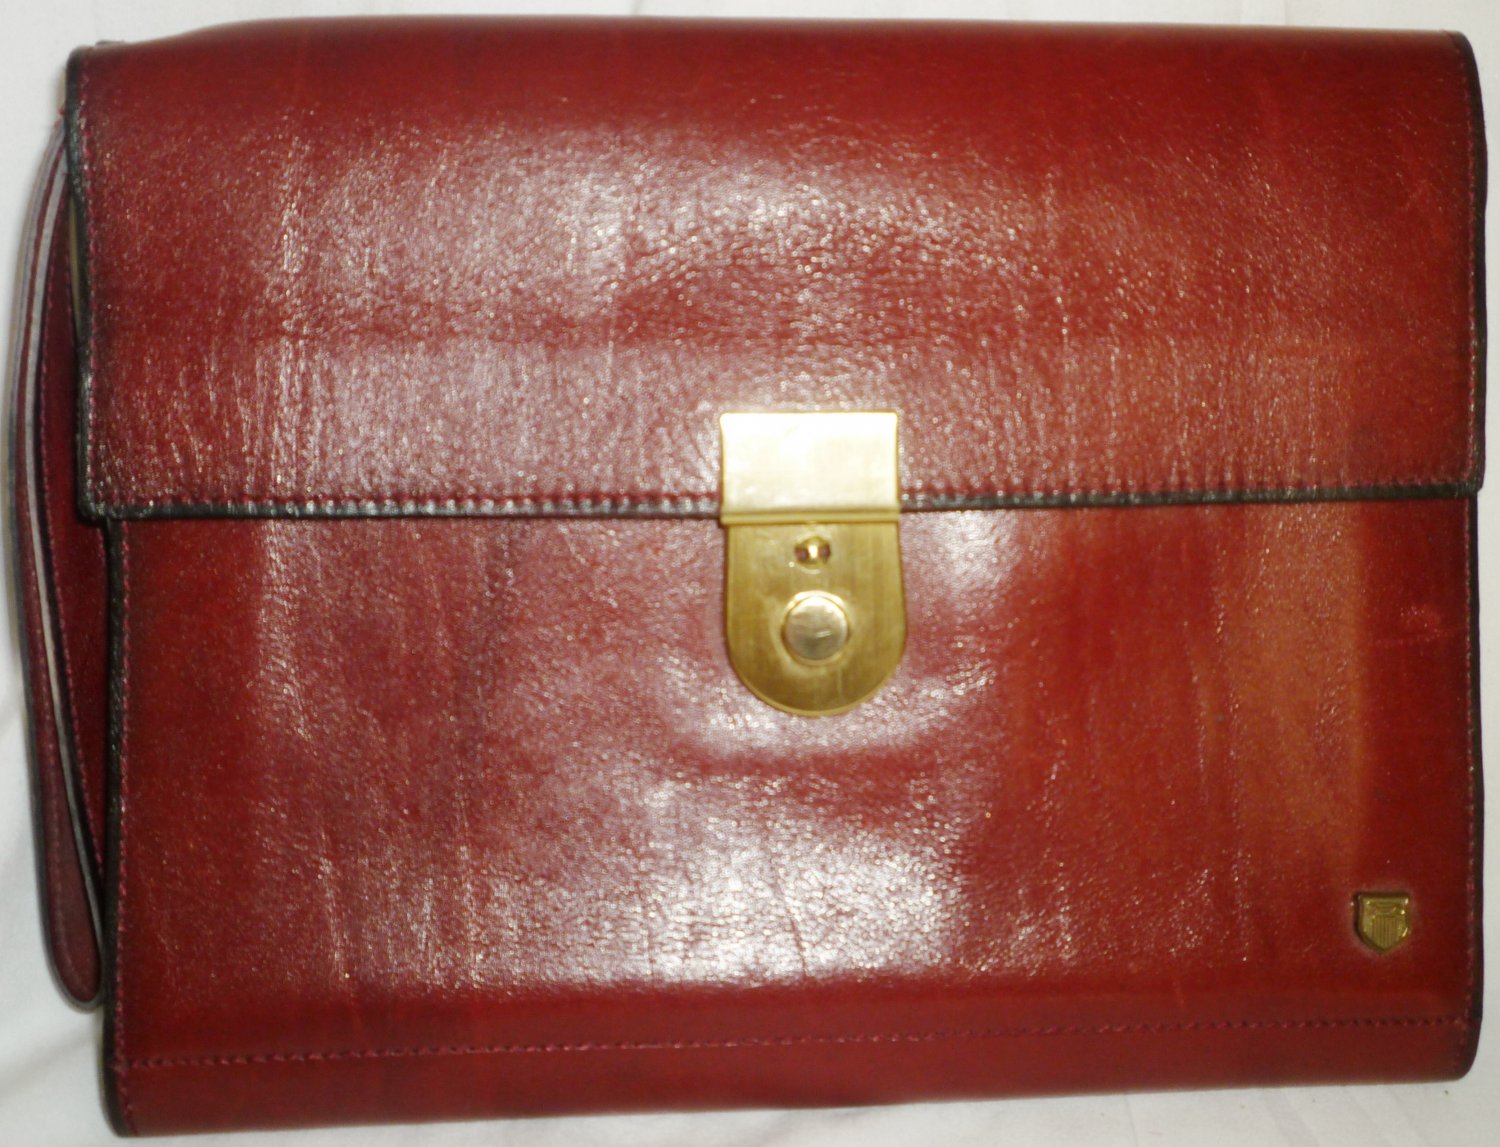 VINTAGE HIGH QUALITY LEATHER MEN'S HAND BAG CLUTCH PURSE WESTERN GERMANY LOCK